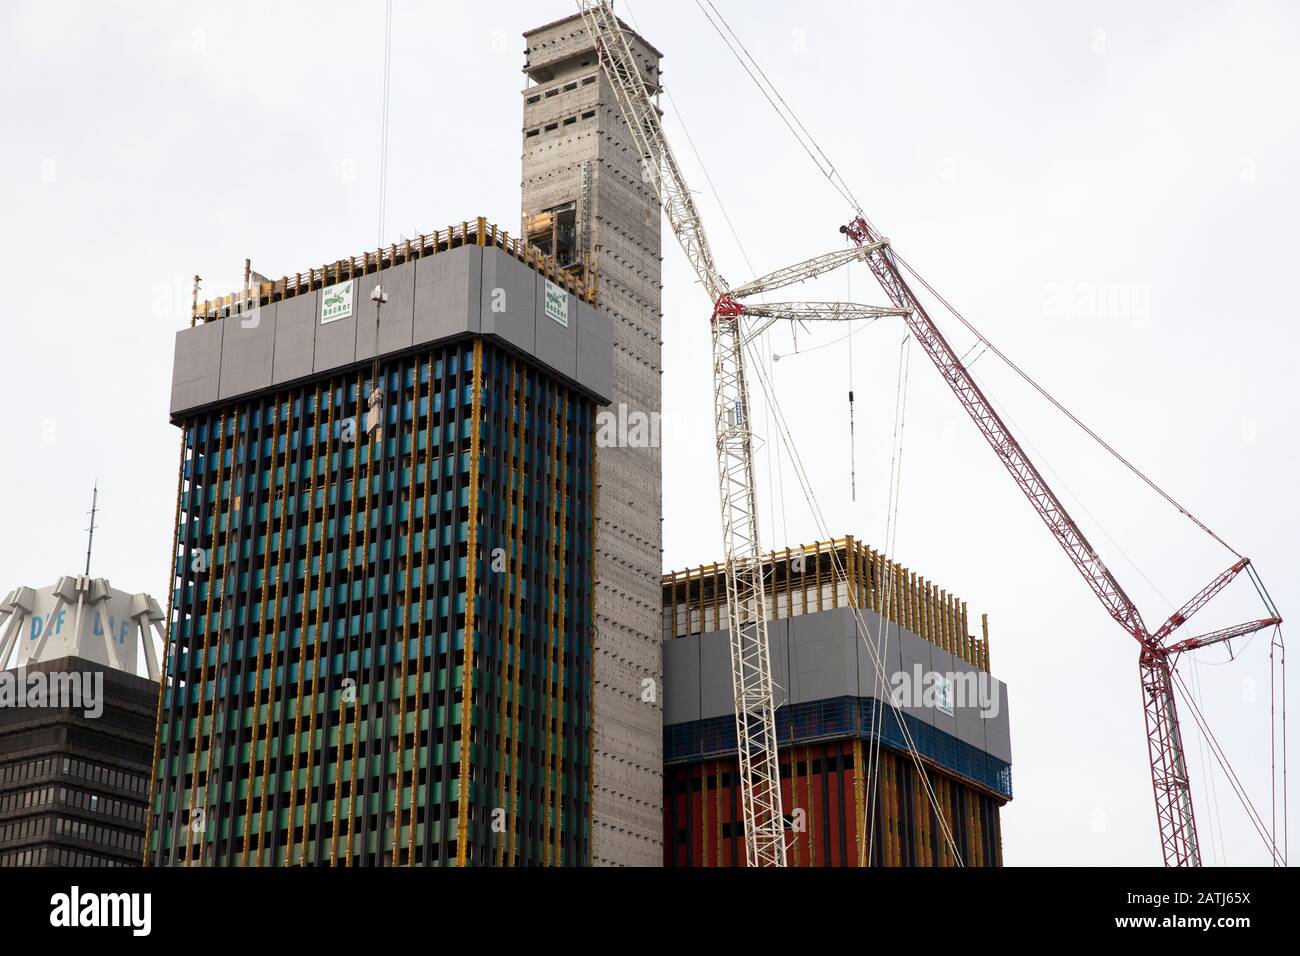 the building of the Deutsche Welle (public international broadcaster), which is in demolition, Cologne, Germany. February 3, 2020 Stock Photo